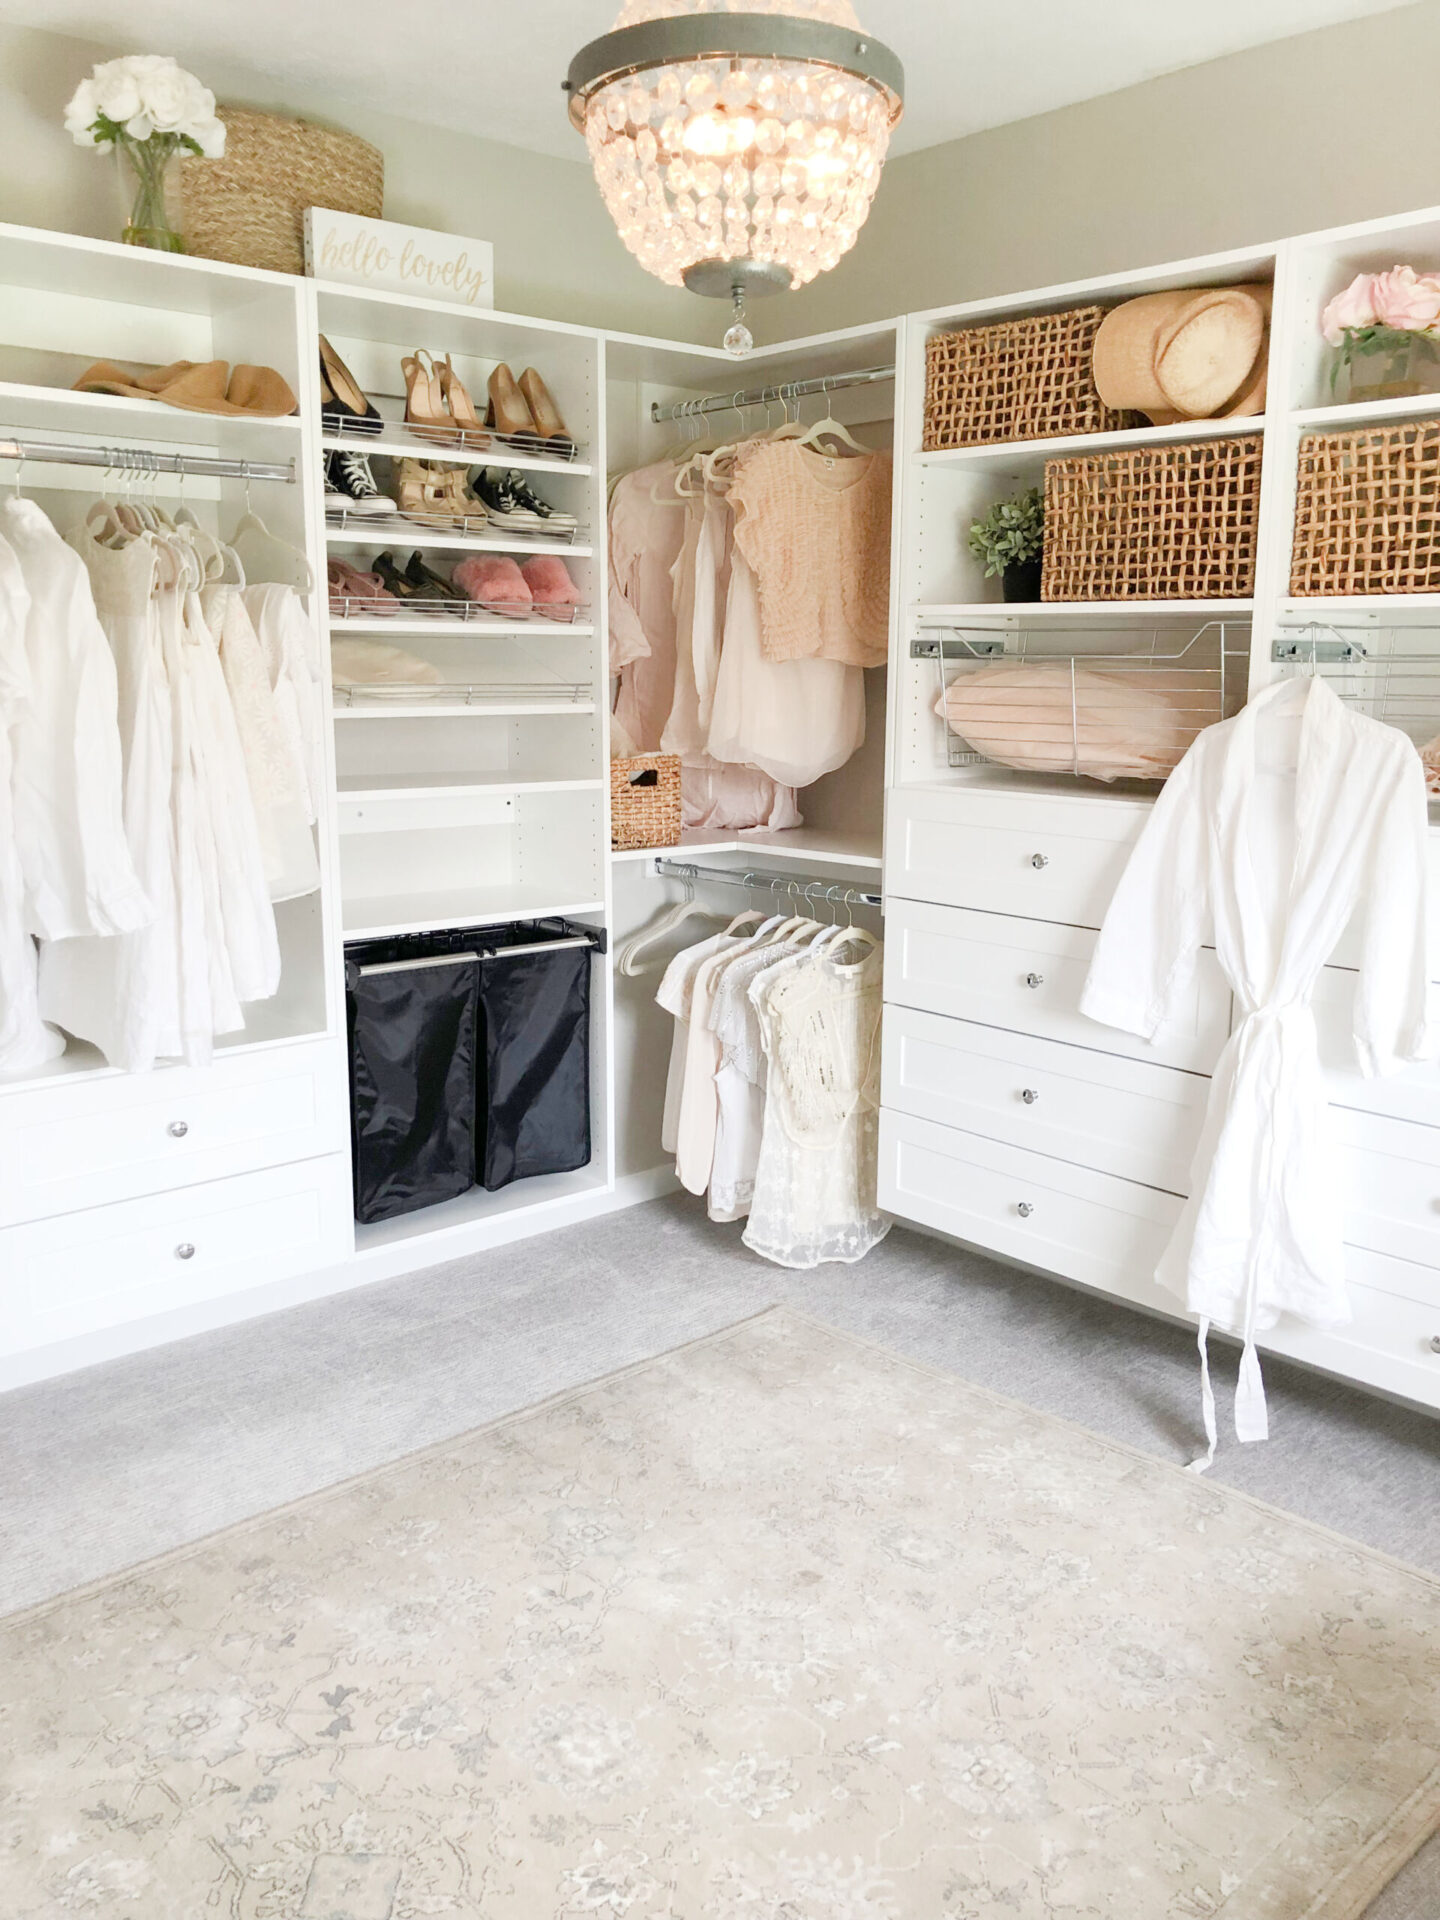 A pretty closet with plenty of shelves and storage in my "cloffice" space which I carved out of a spare bedroom - Hello Lovely Studio.